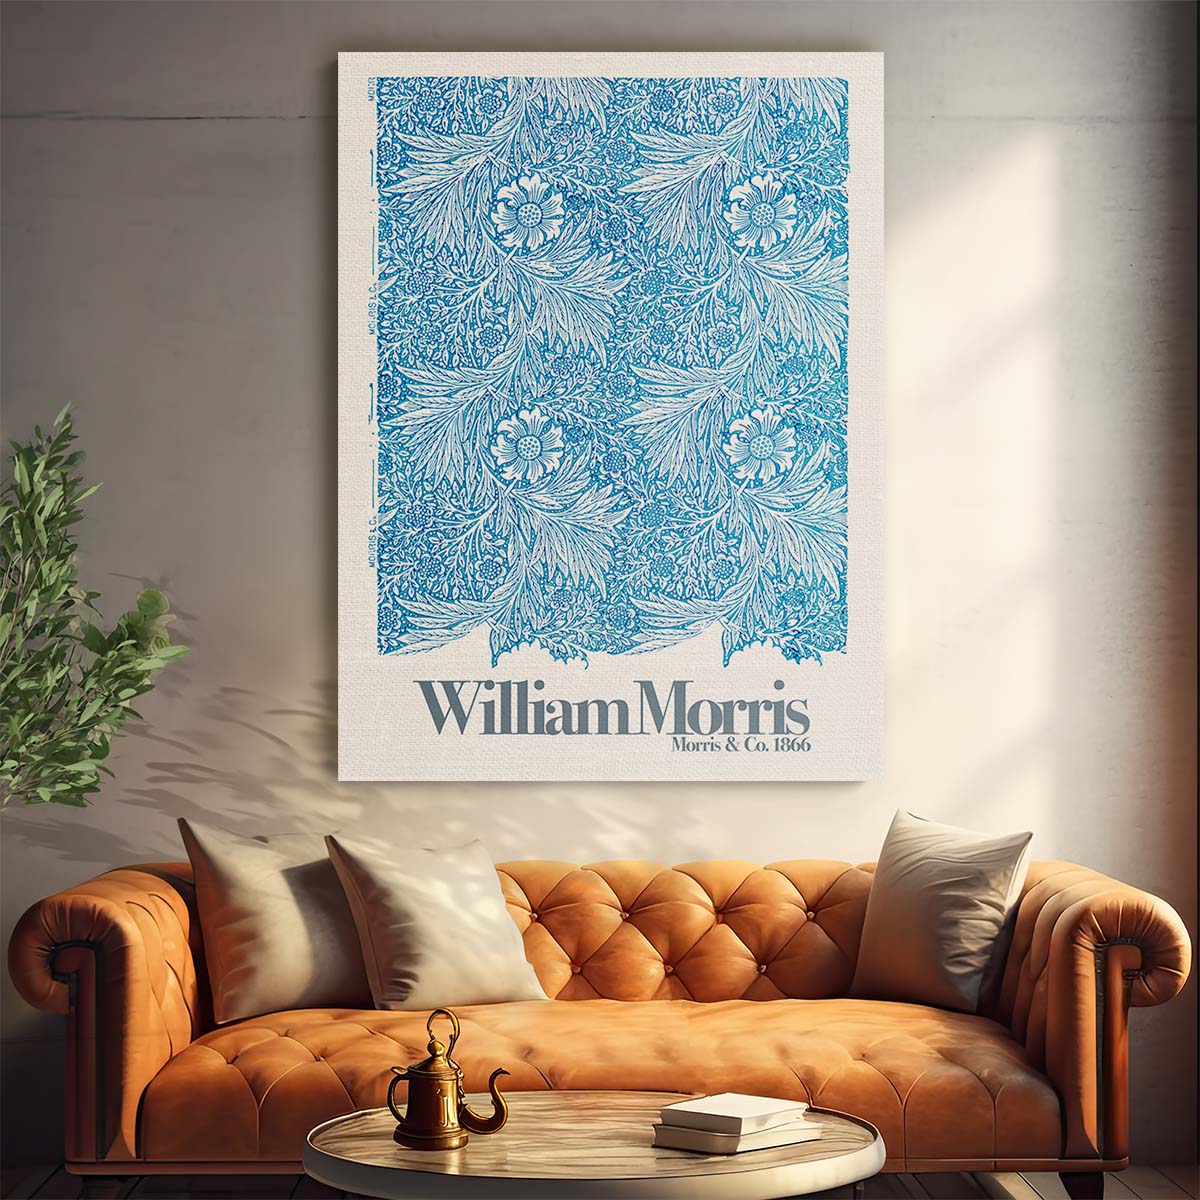 William Morris Marigold Floral Typography Illustration Poster by Luxuriance Designs, made in USA